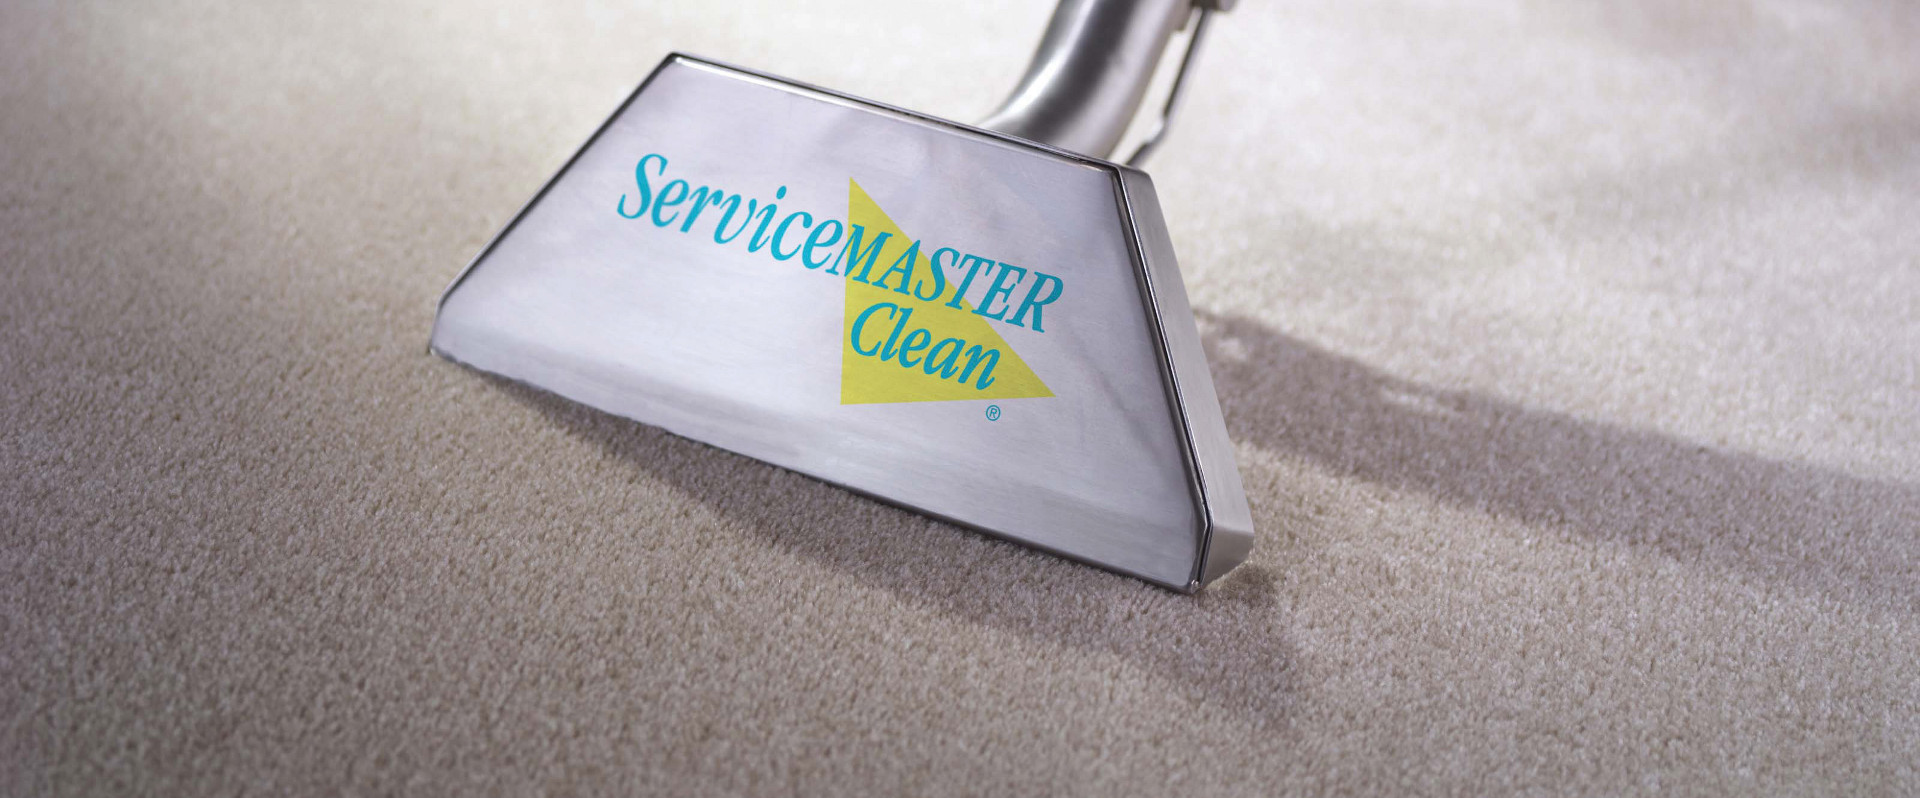 sservicemaster clean carpet cleaning equipment 